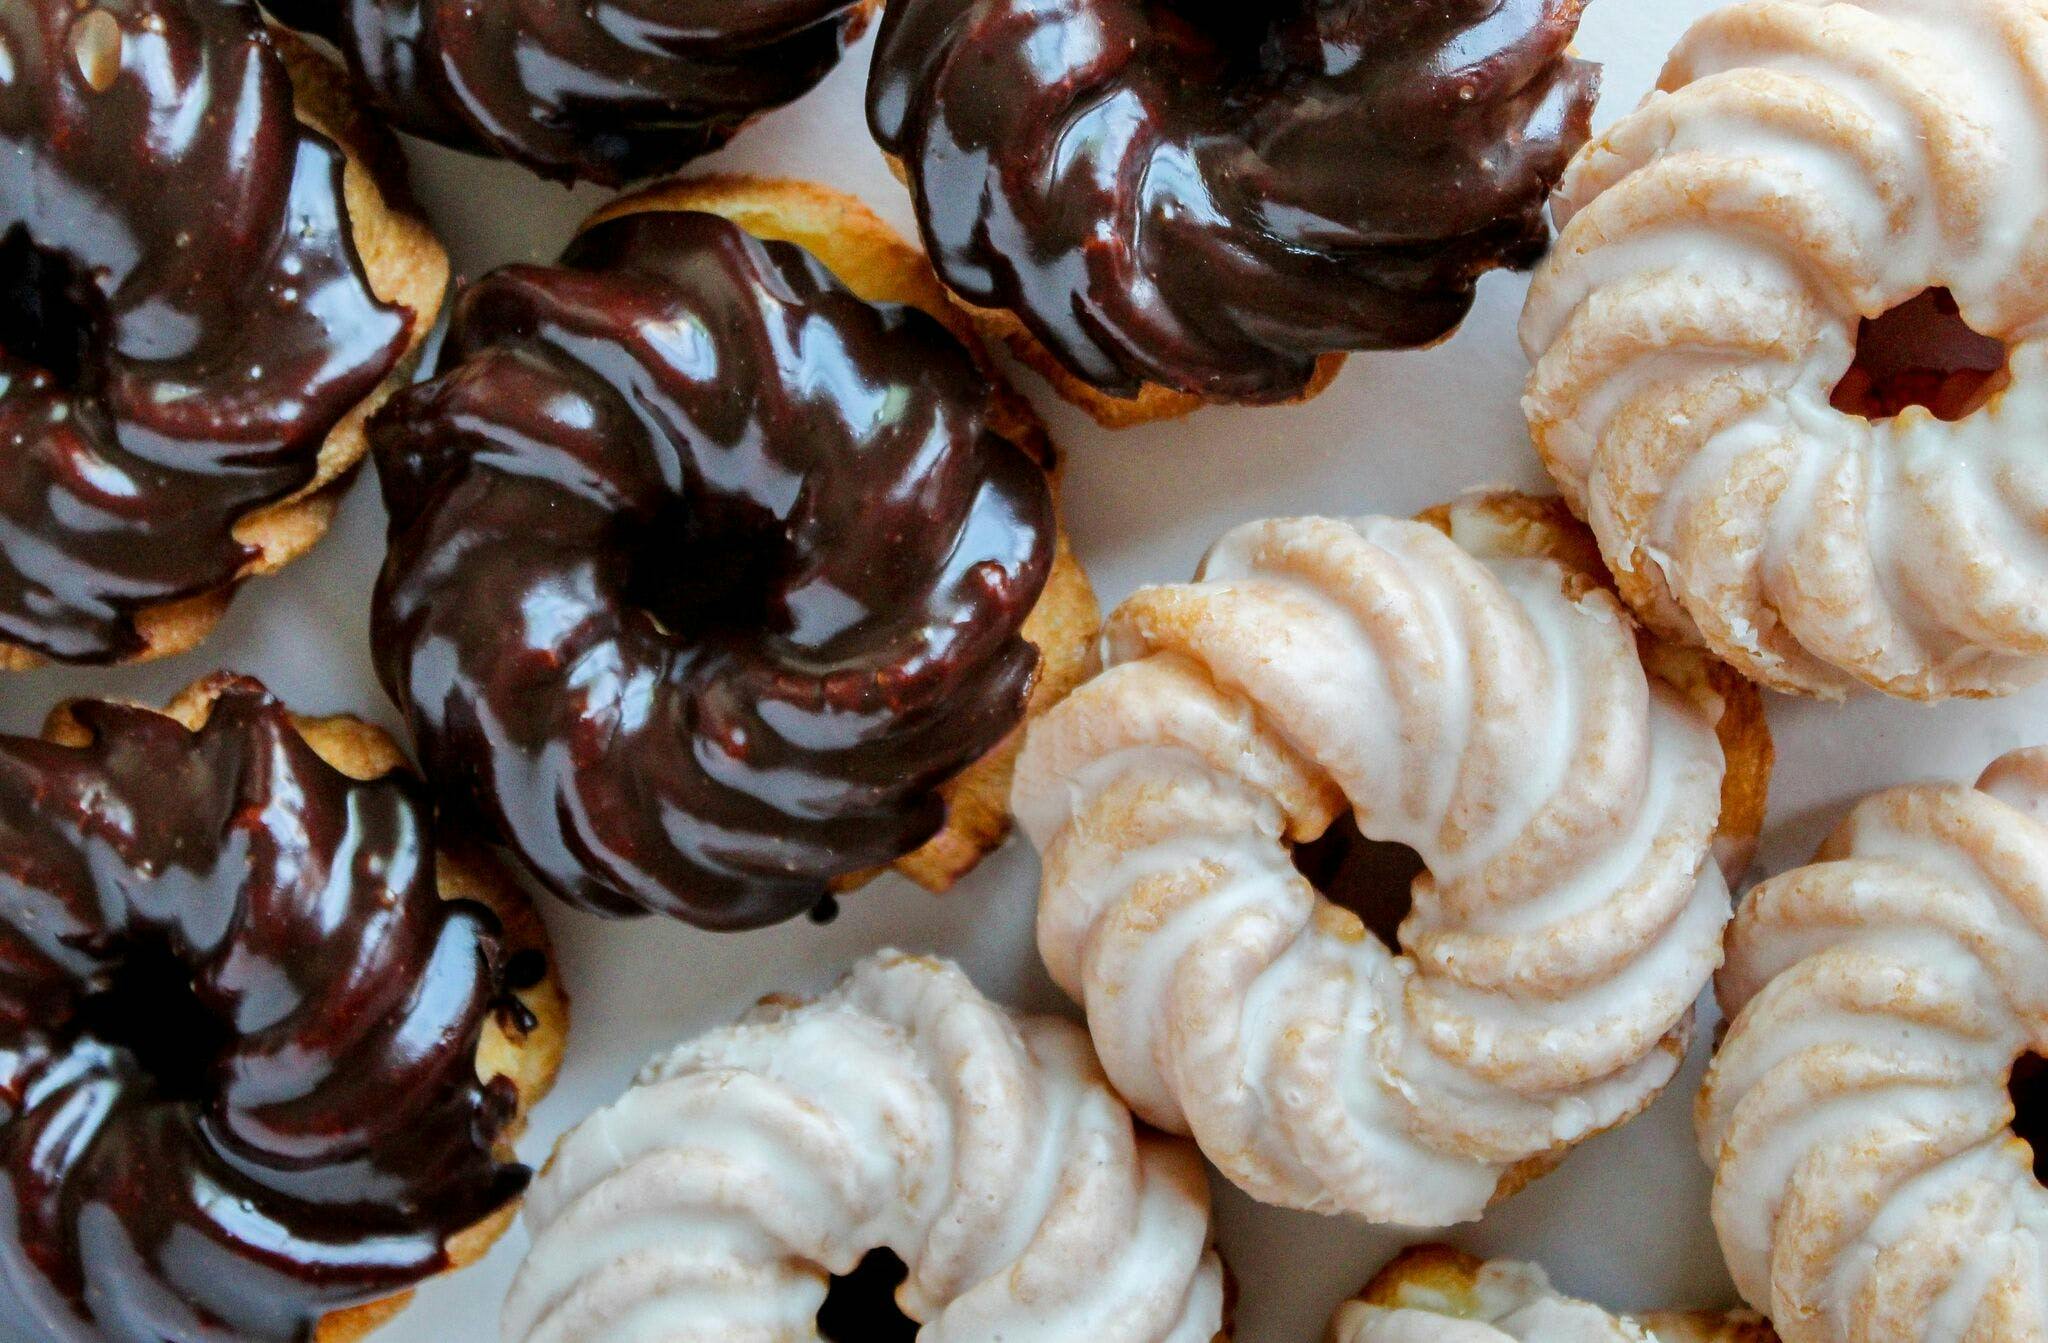 french cruller donut shop with